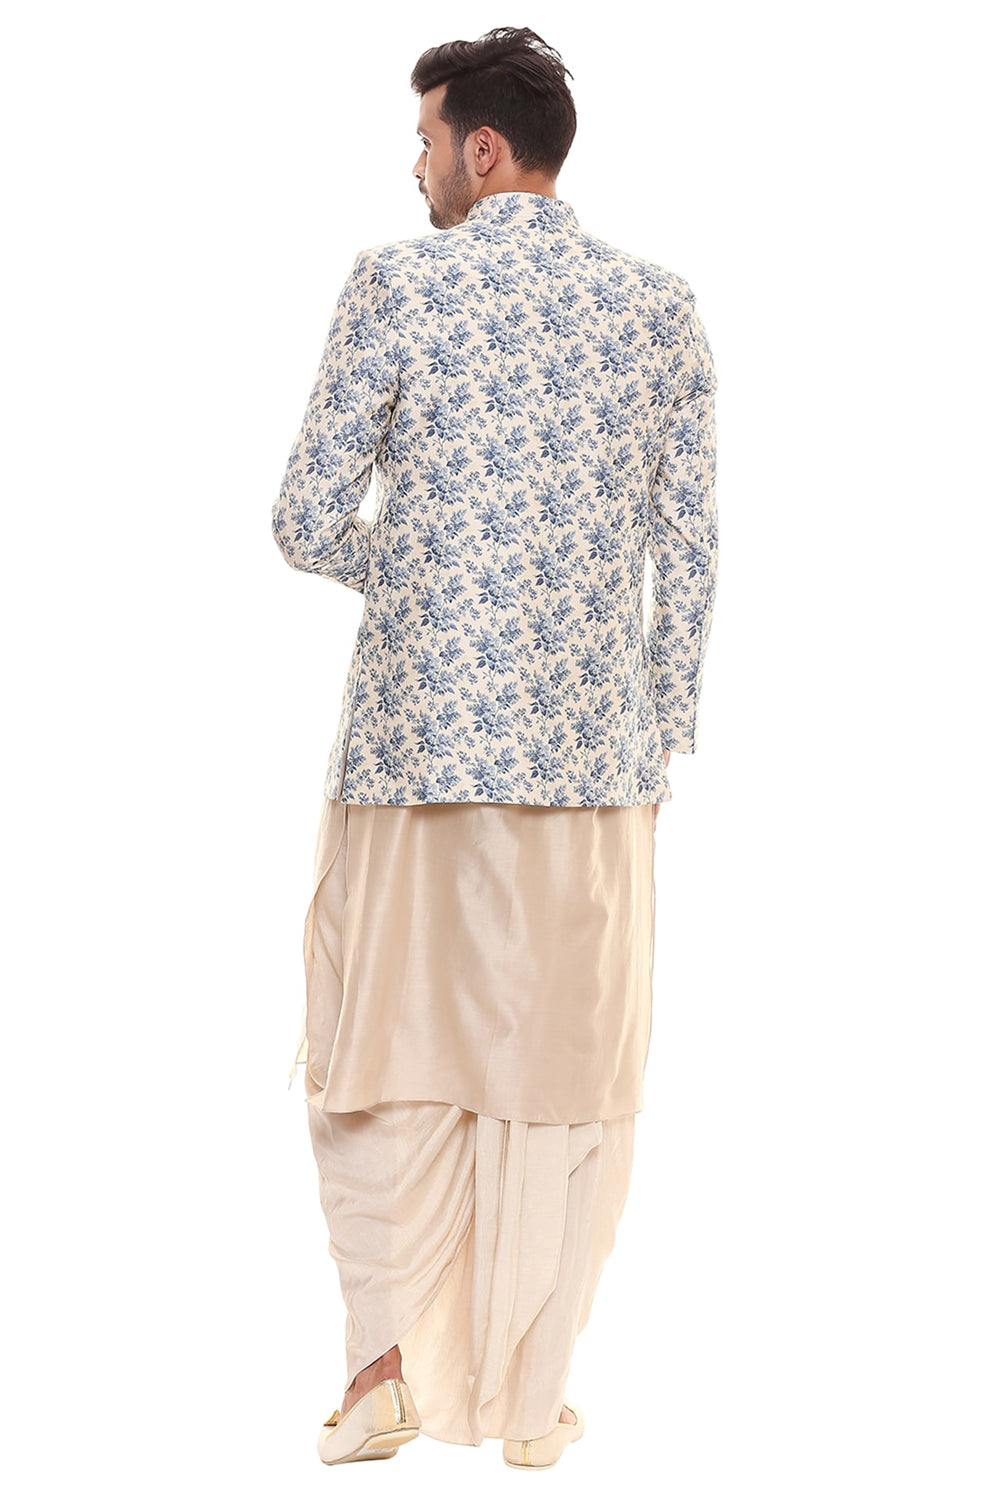 Offwhite Collared Kurta With Dhoti Pants Paired With Applique Floral Jacket